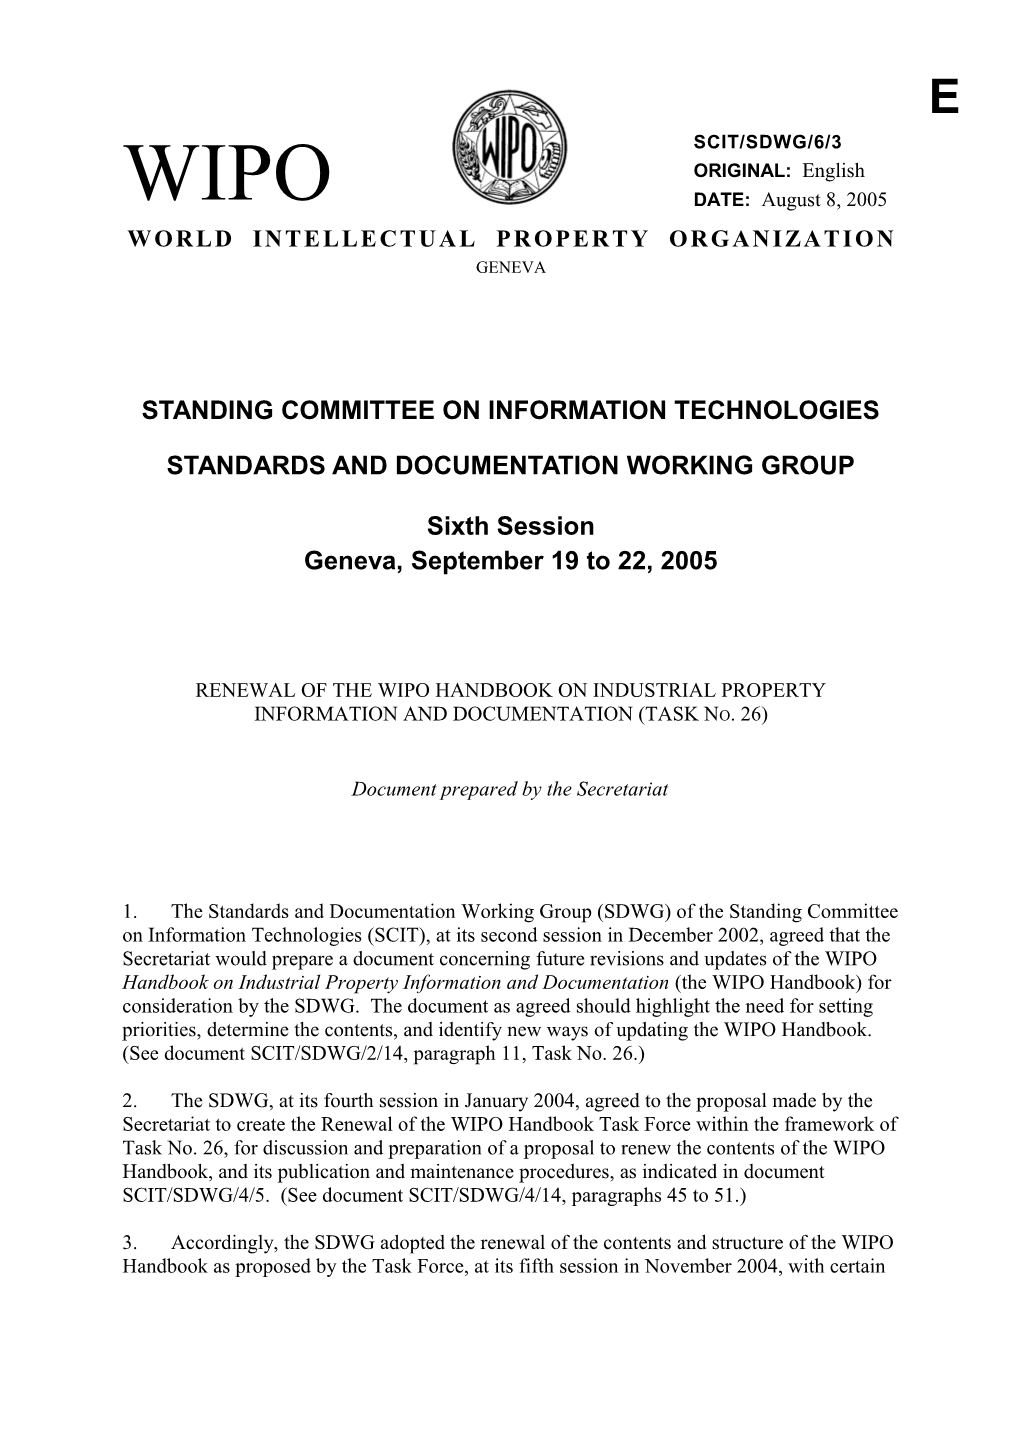 SCIT/SDWG/6/3: Renewal of the WIPO Handbook on Industrial Property Information and Documentation